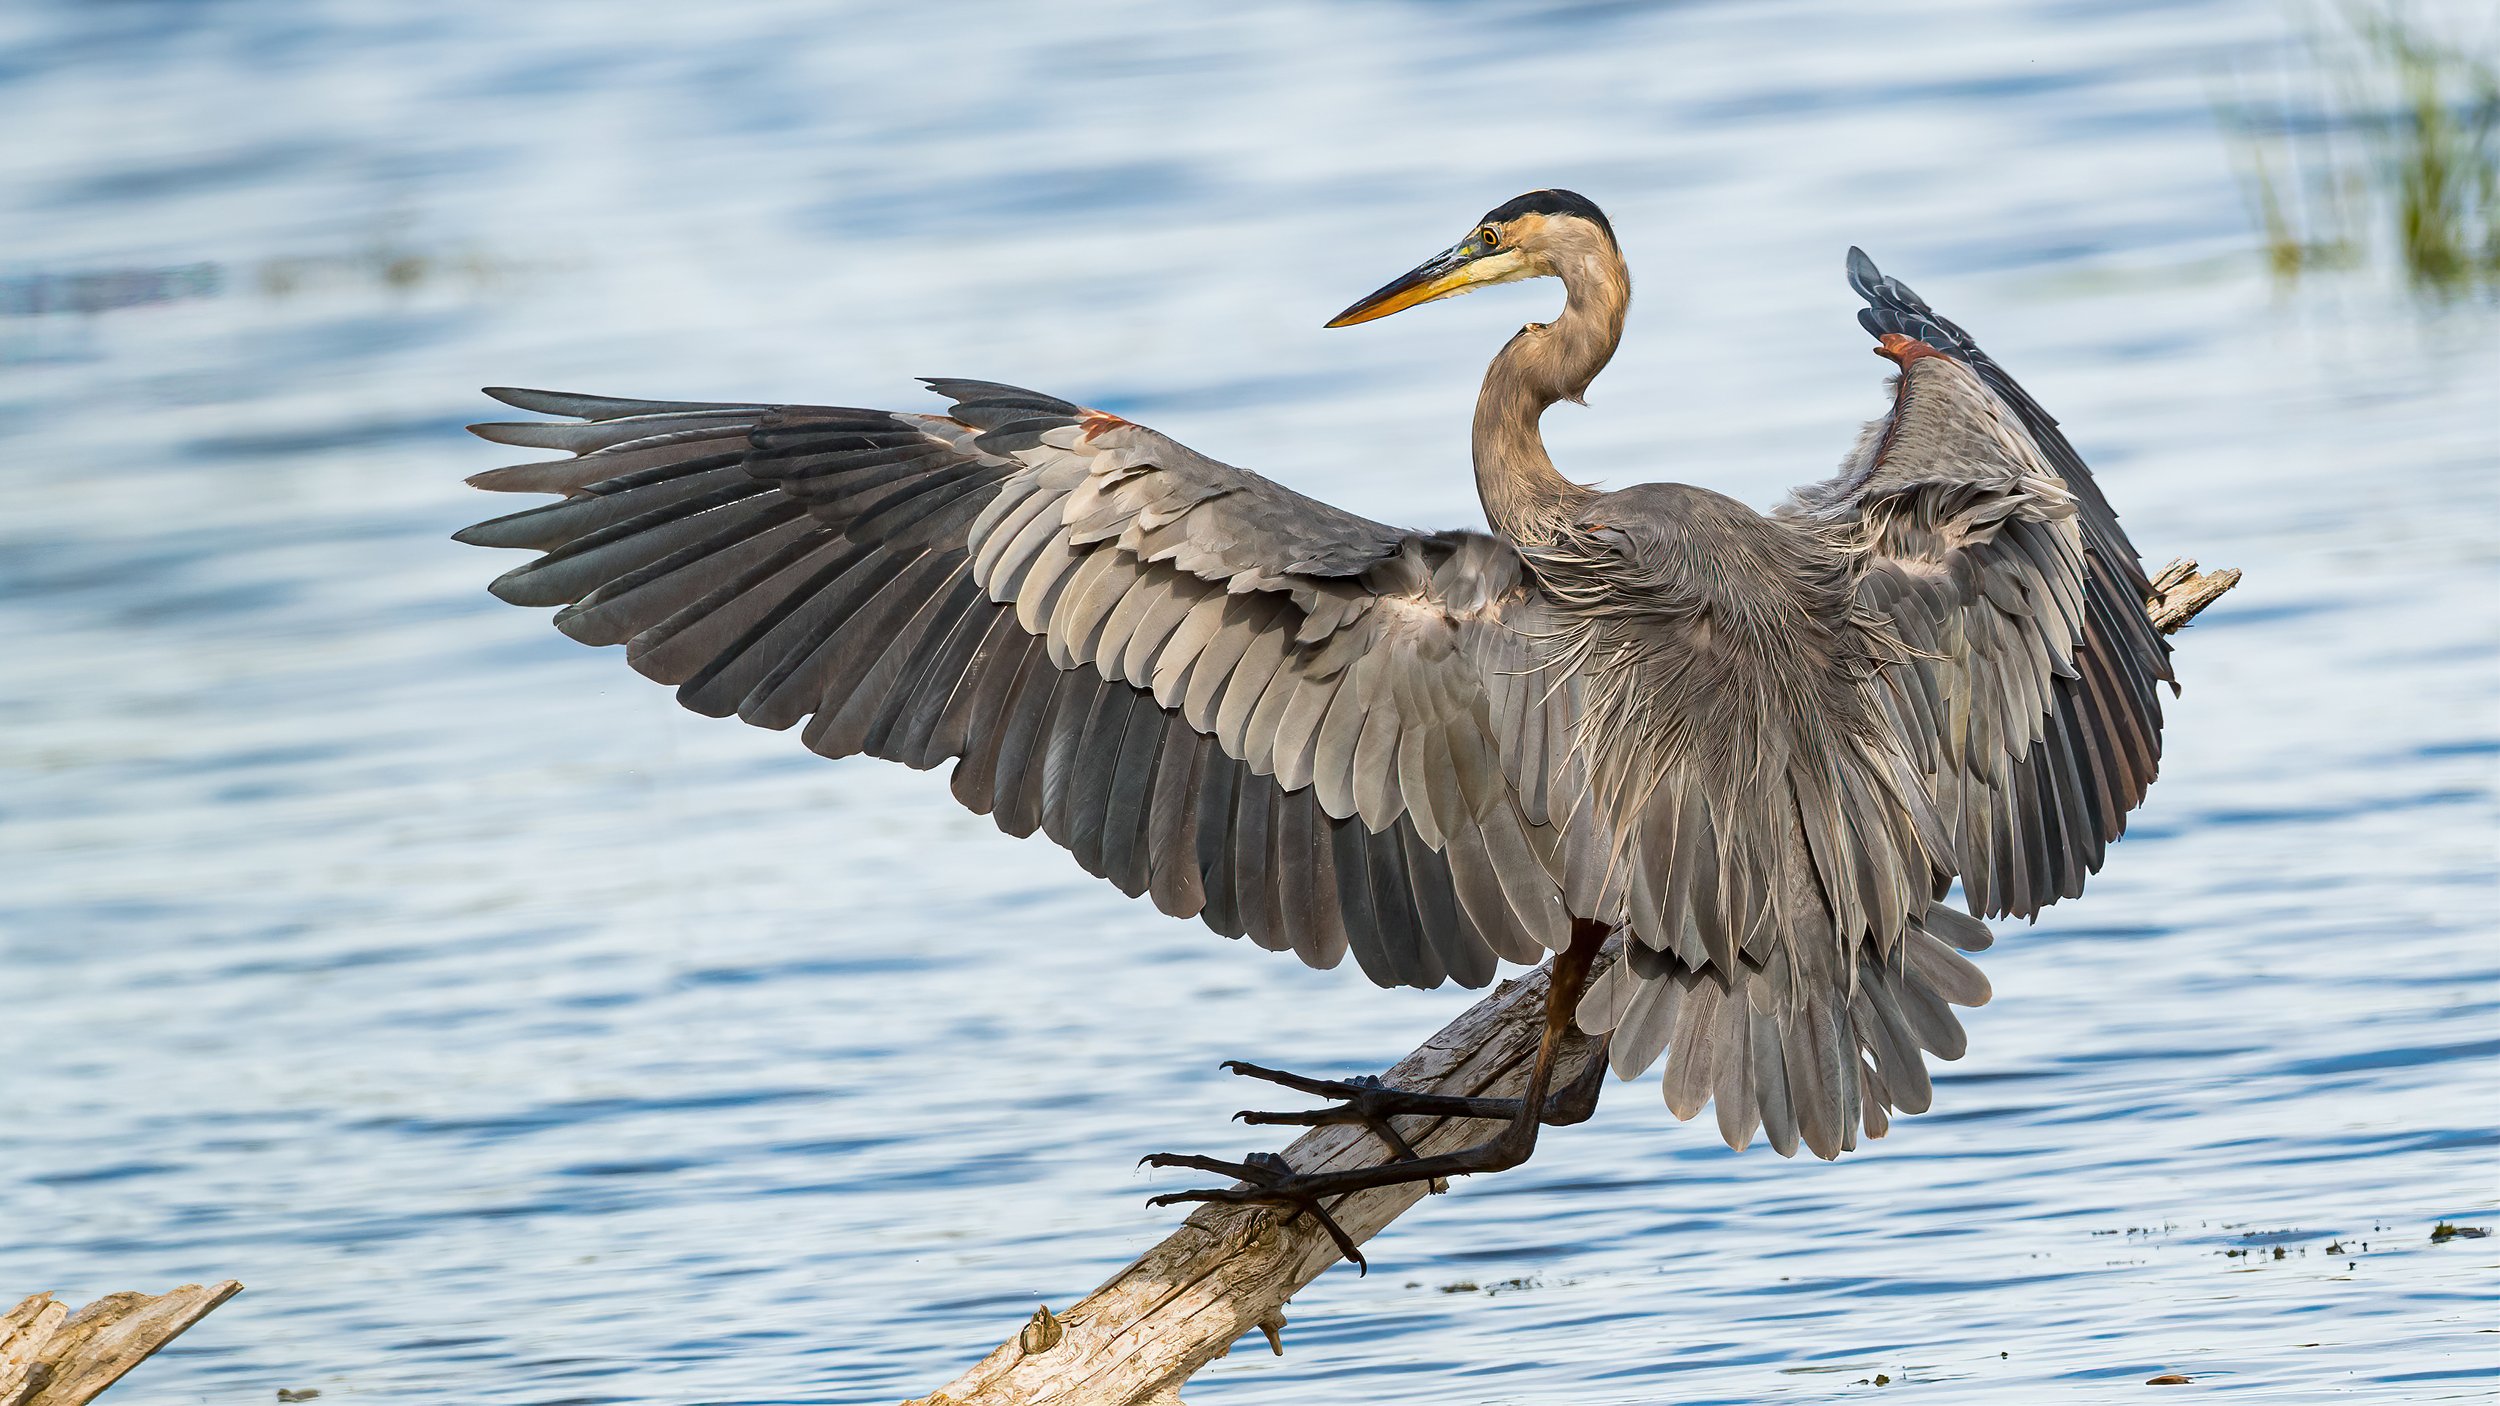 11 A great blue heron spreads its wings as it lands on a branch over the water.jpg